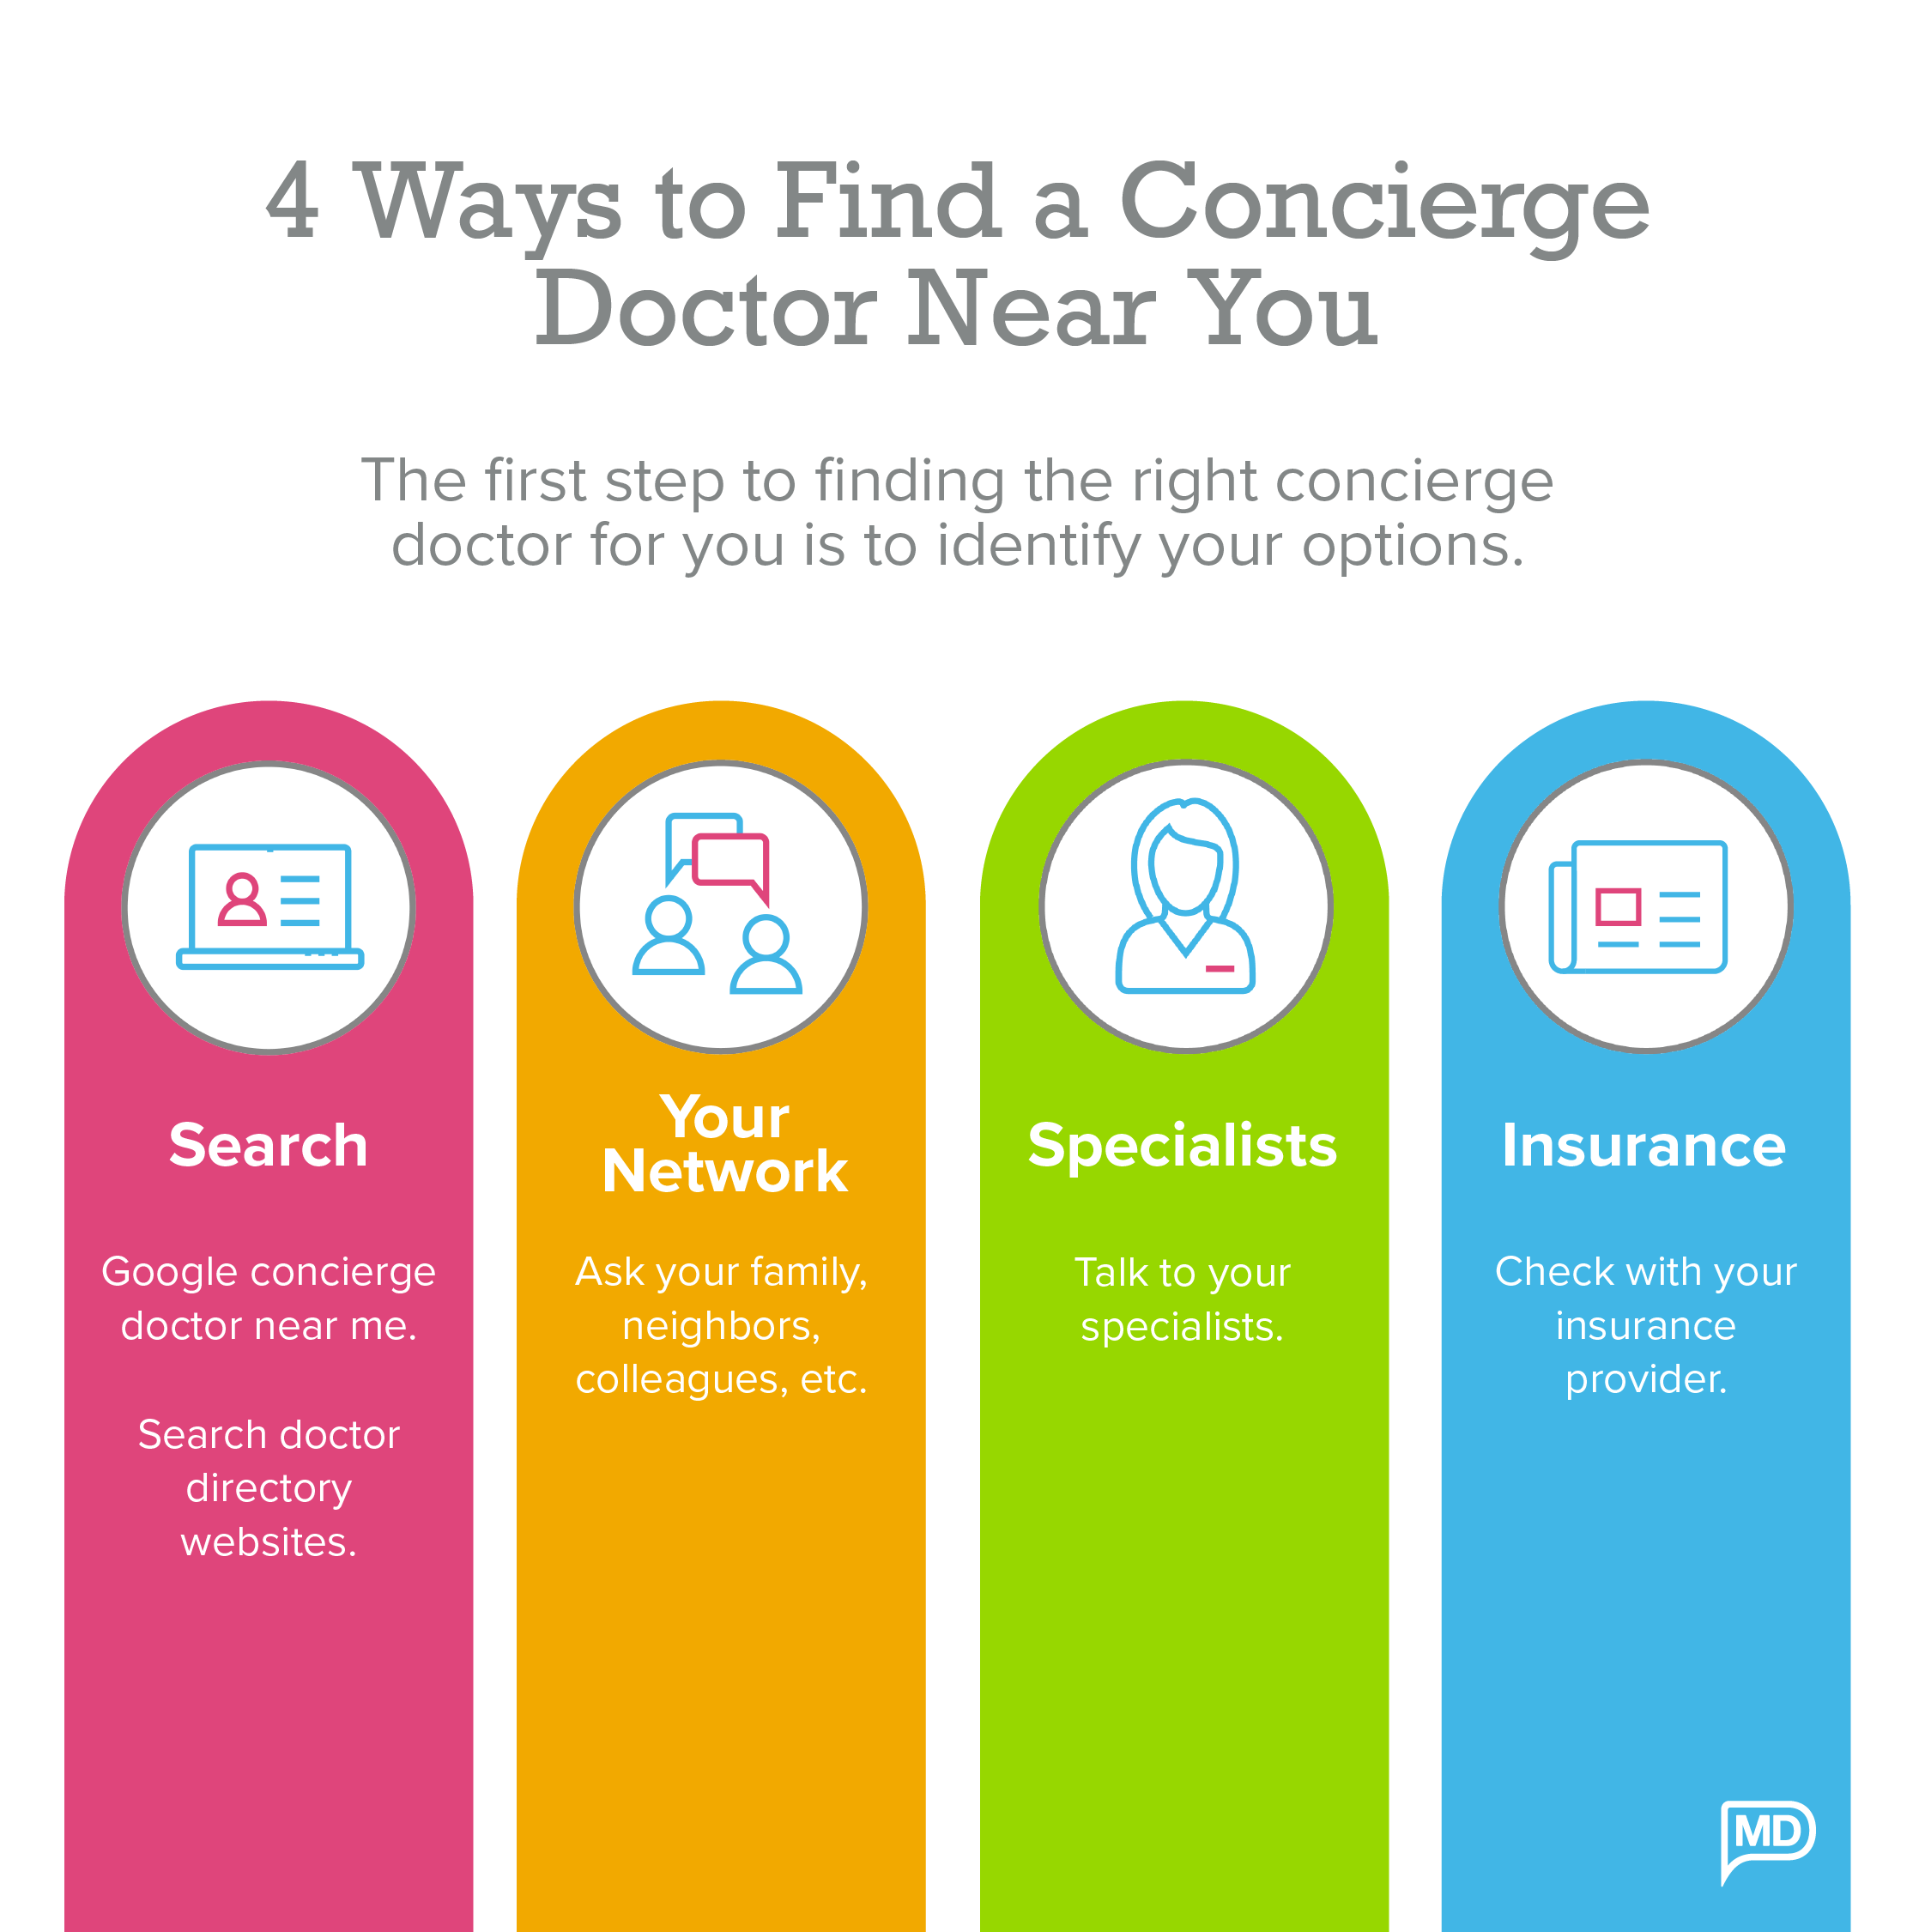 Infographic showing the top four ways to find a concierge doctor near you